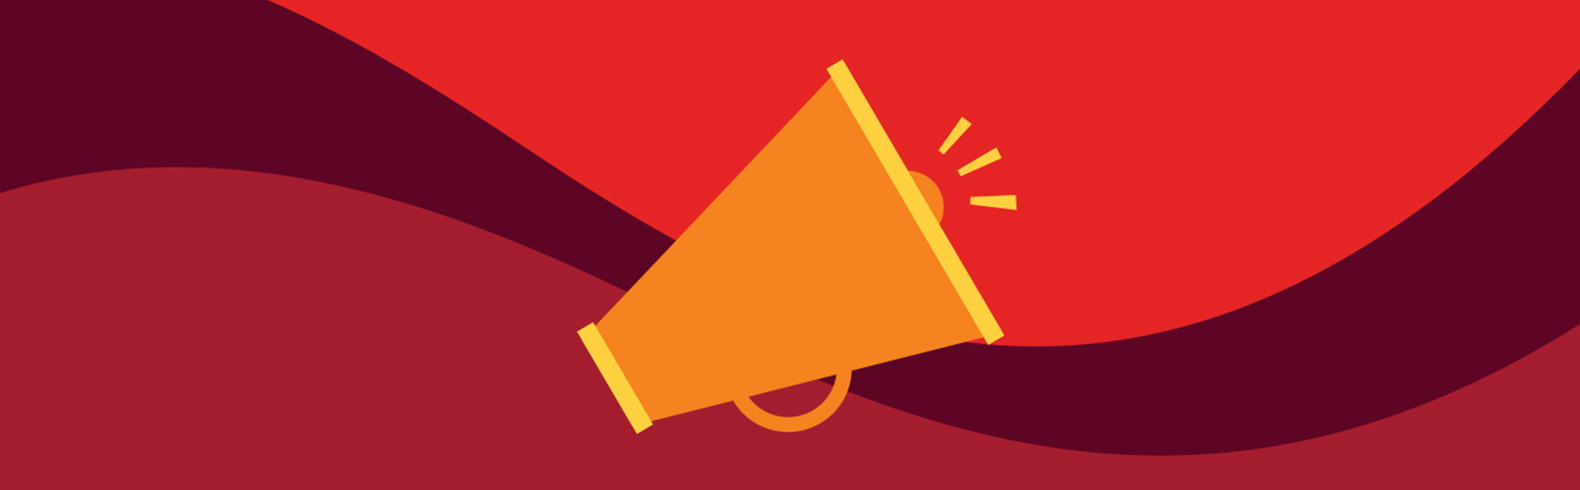 illustration of a megaphone on a background of three shades of red